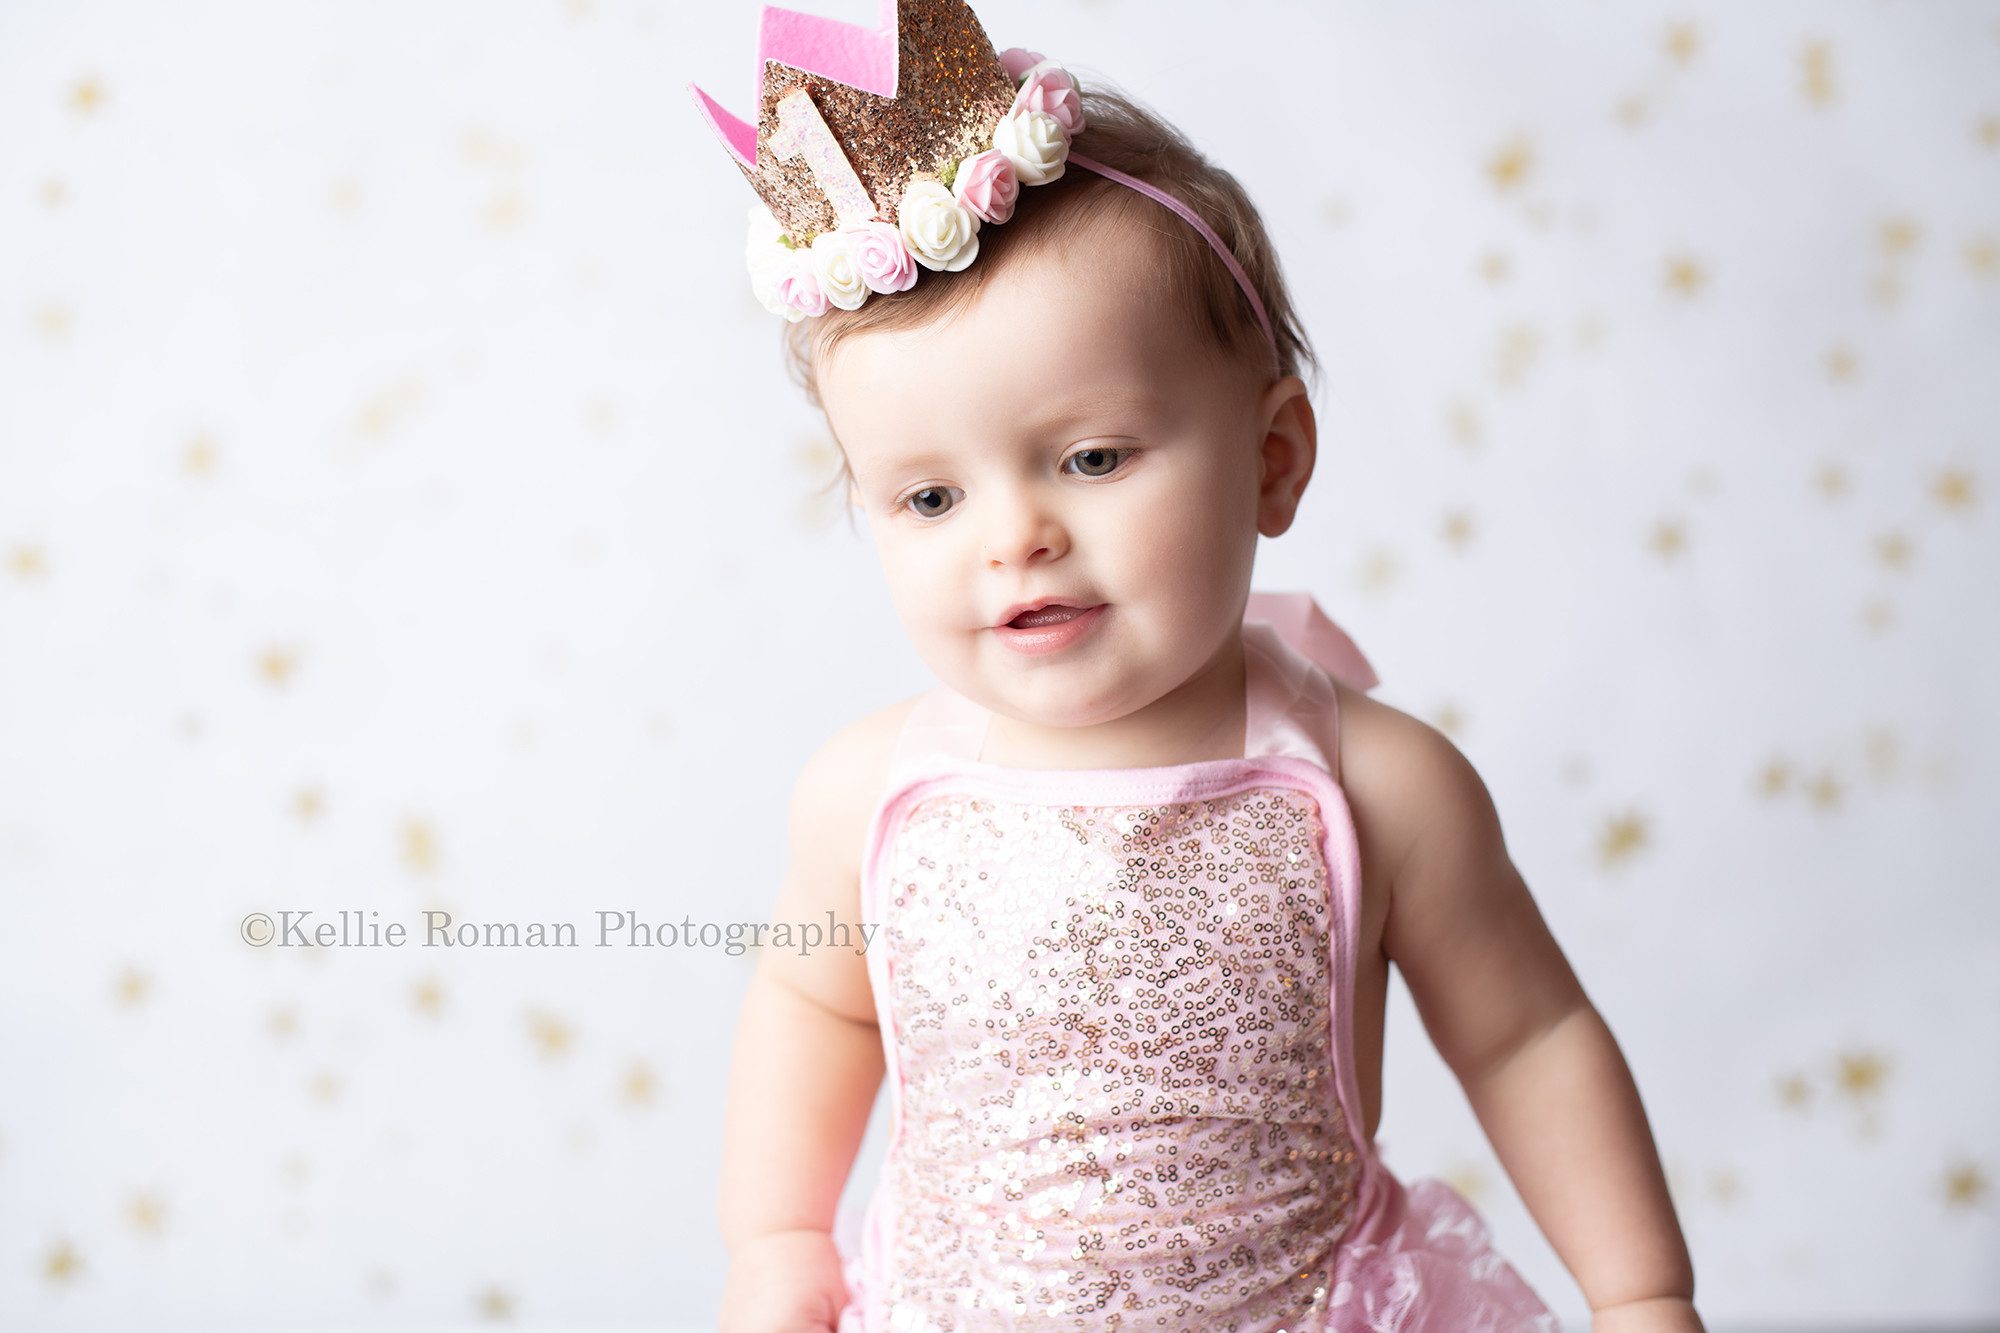 girlie cake smash a one year old girl is in a milwaukee photographers studio she is waring a pink romper with gold sequins and a gold crown headband. She is standing up but looking at the grown in front of a white backdrop with gold stars.